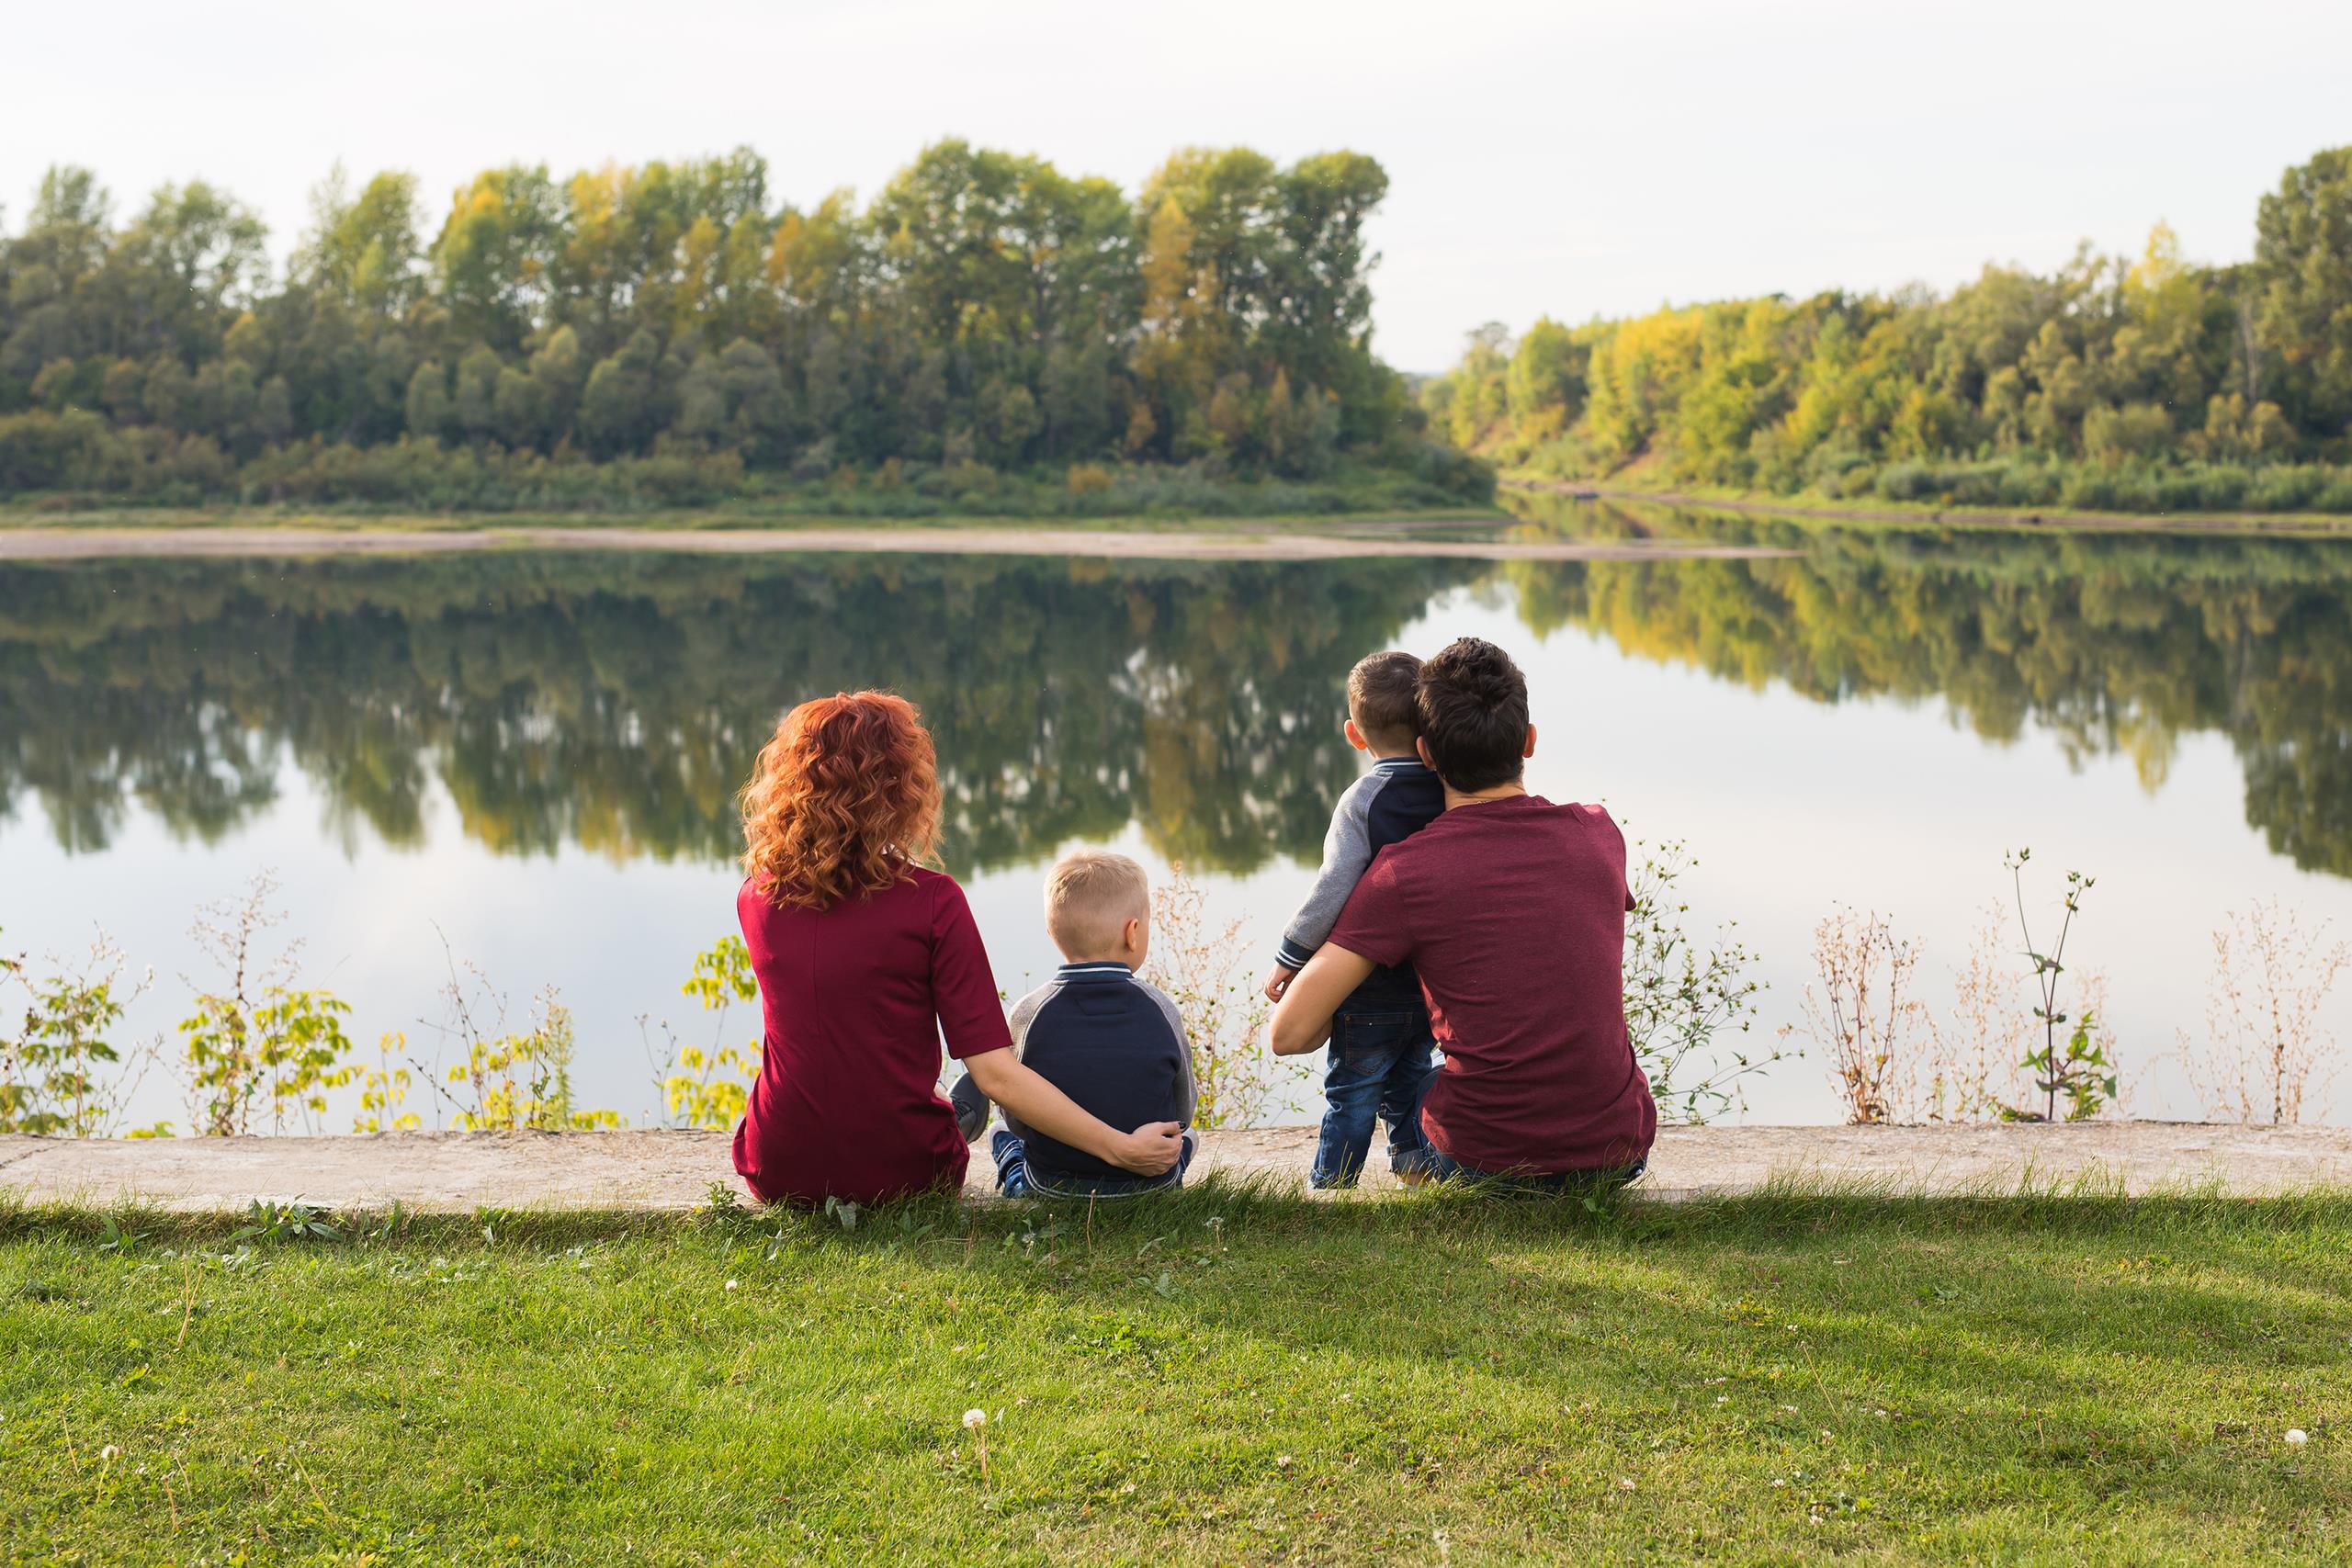 Parents cuddling their children, sat in front of a river with trees on the riverbank in the background